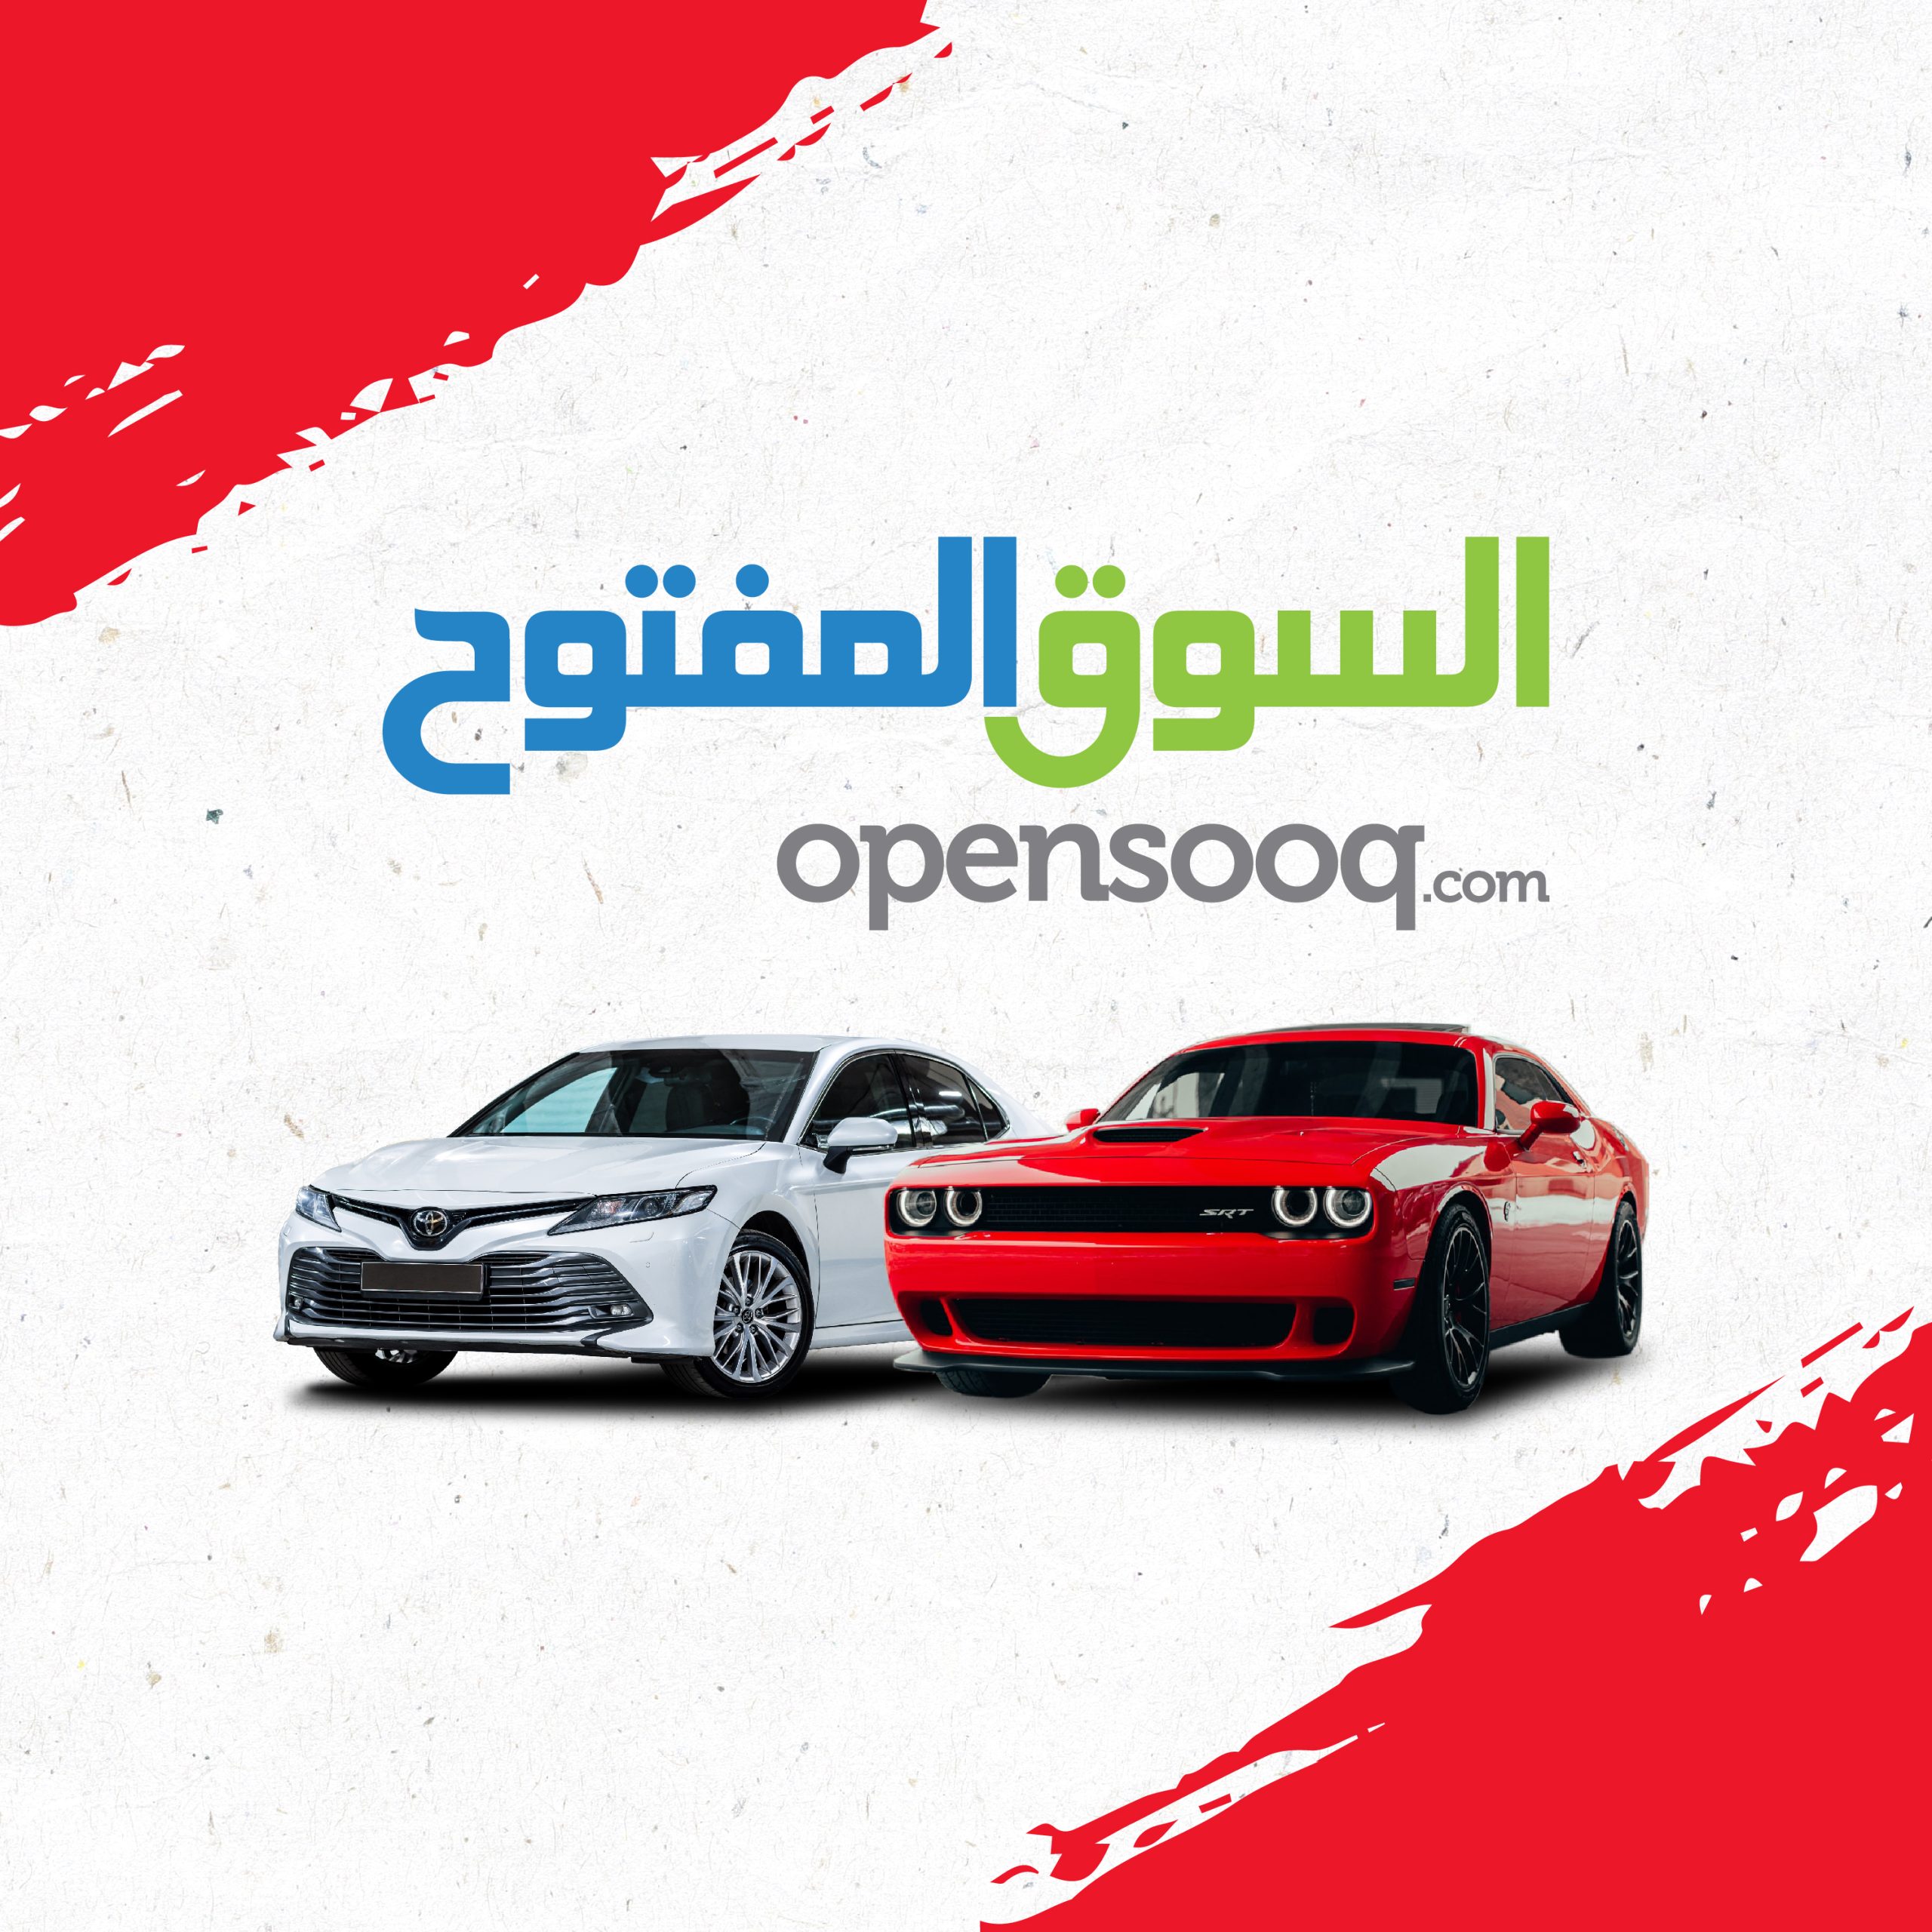 Maximize Your Car’s Value: Tips for Selling on OpenSooq in the UAE